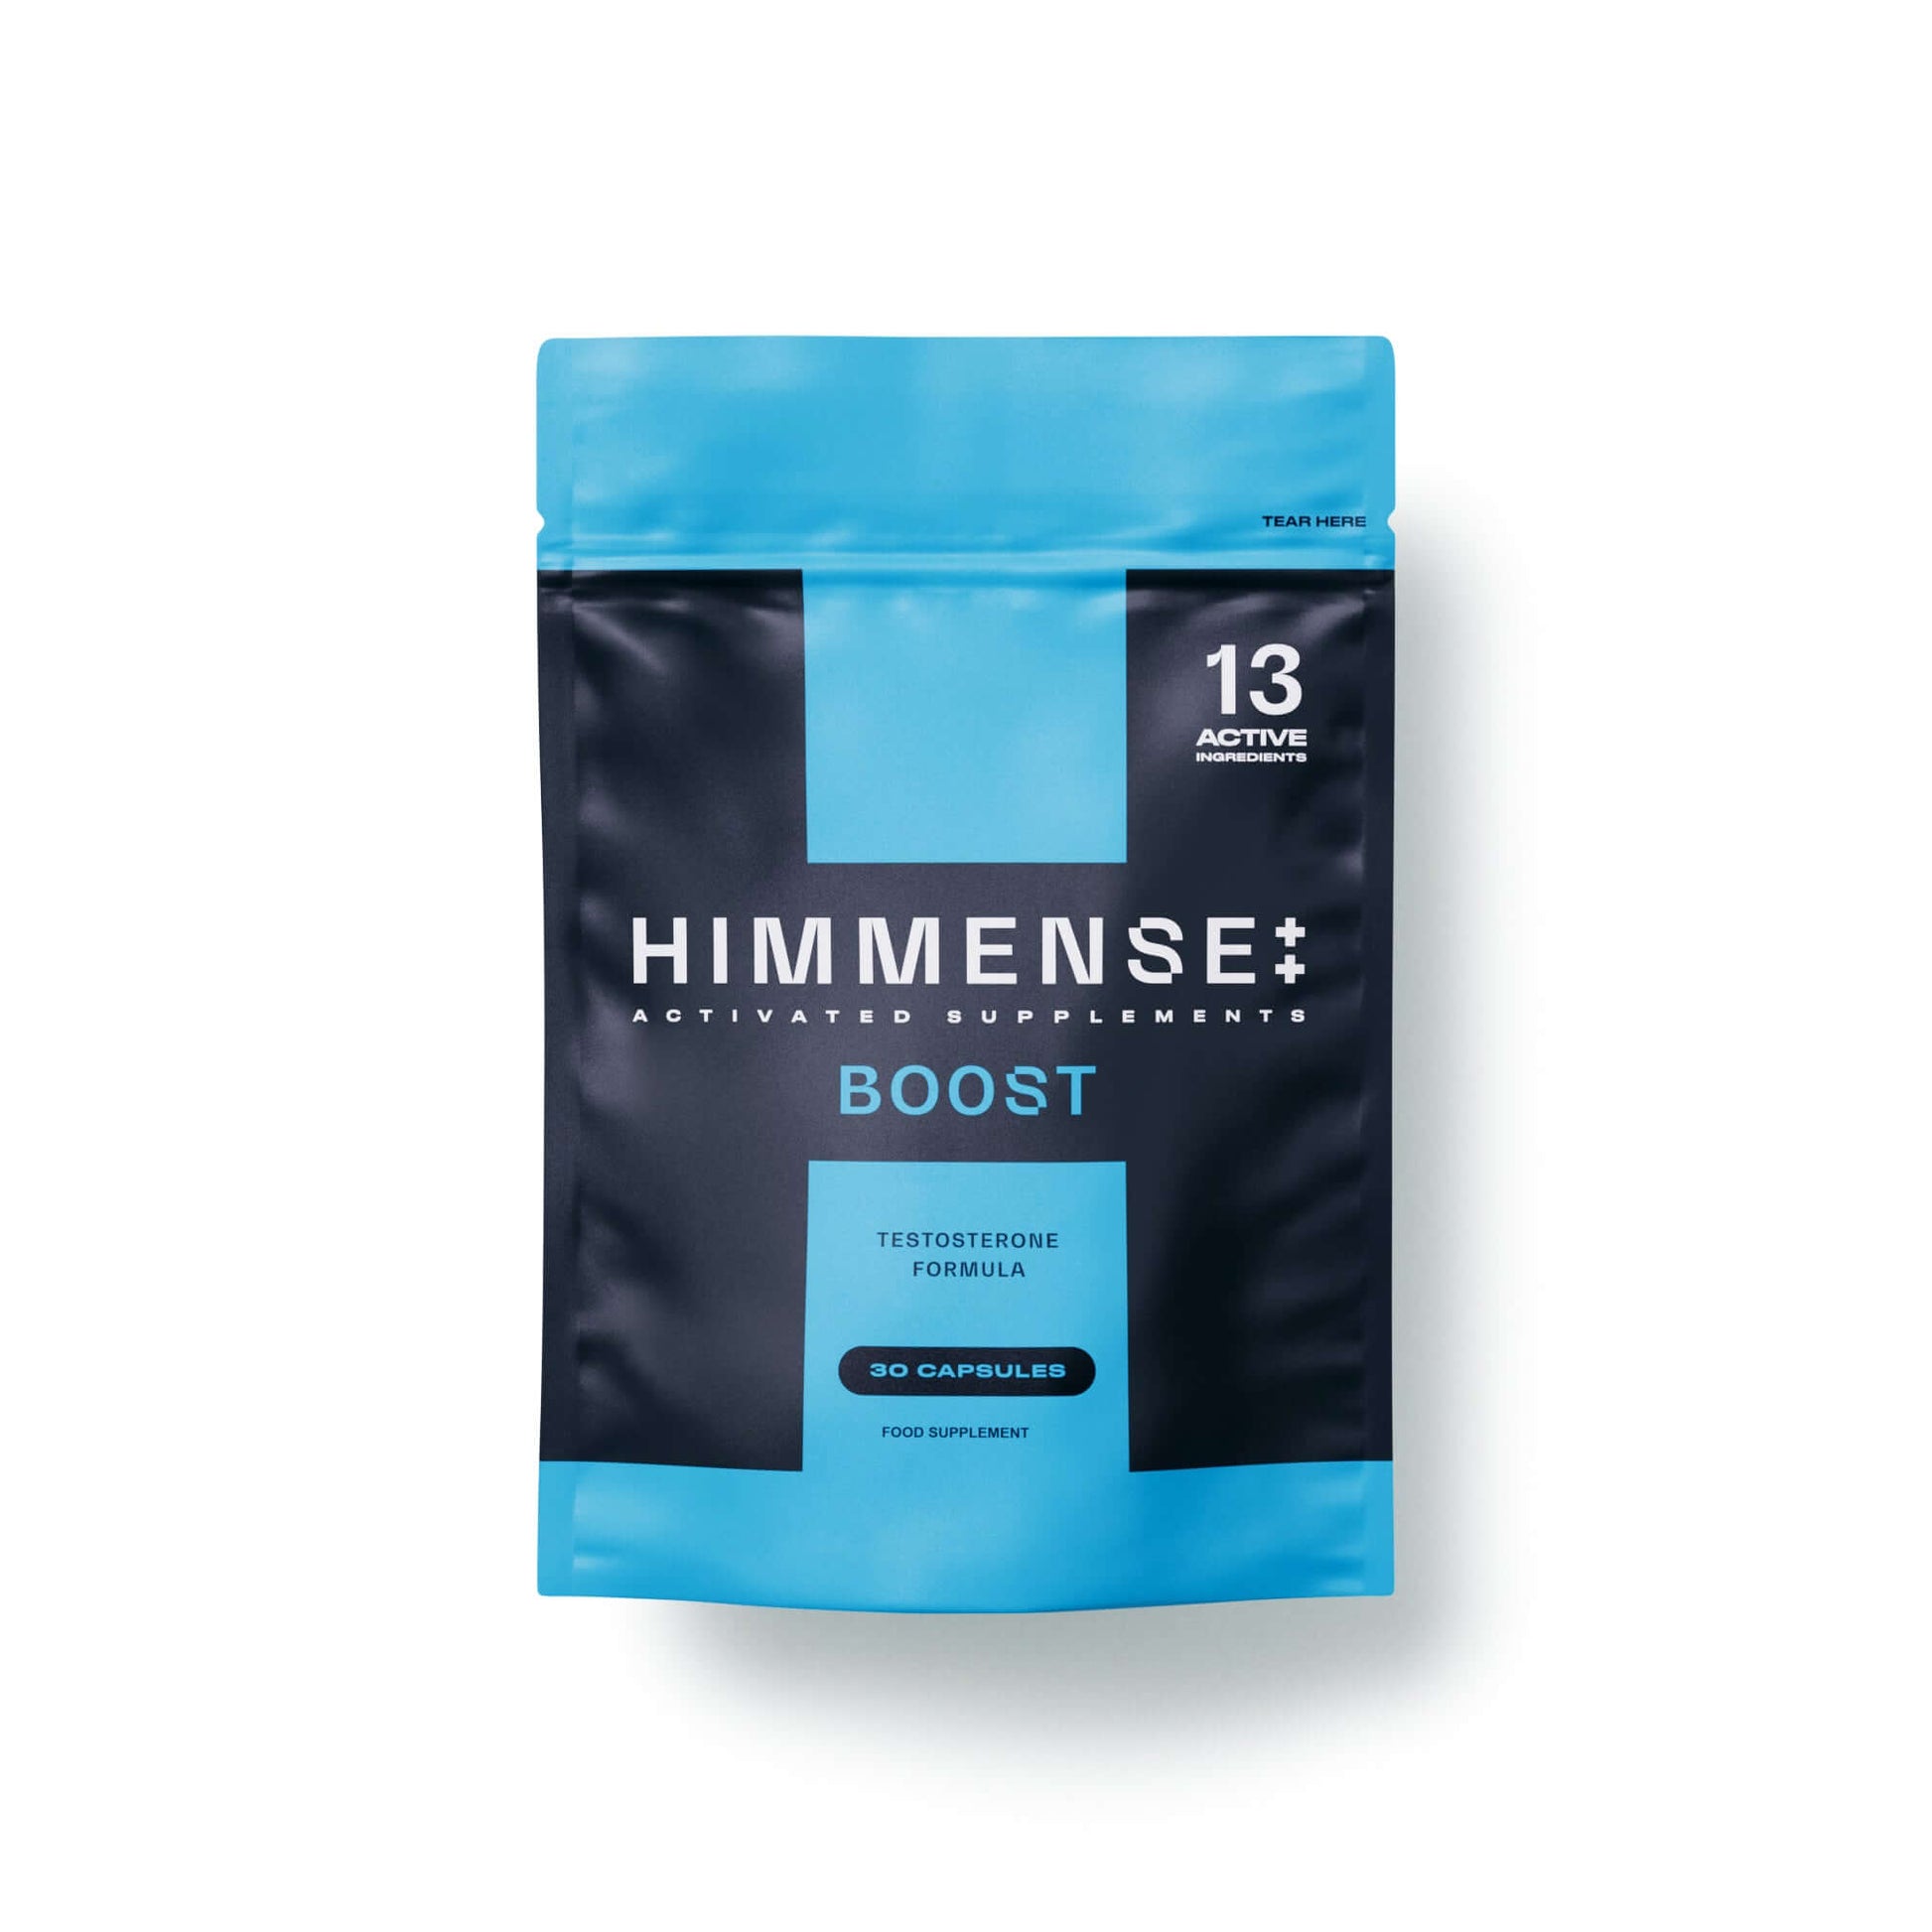 Himmense BOOST testosterone formula supplement for energy, muscle mass, fertility, and mental wellbeing – 30 capsules.